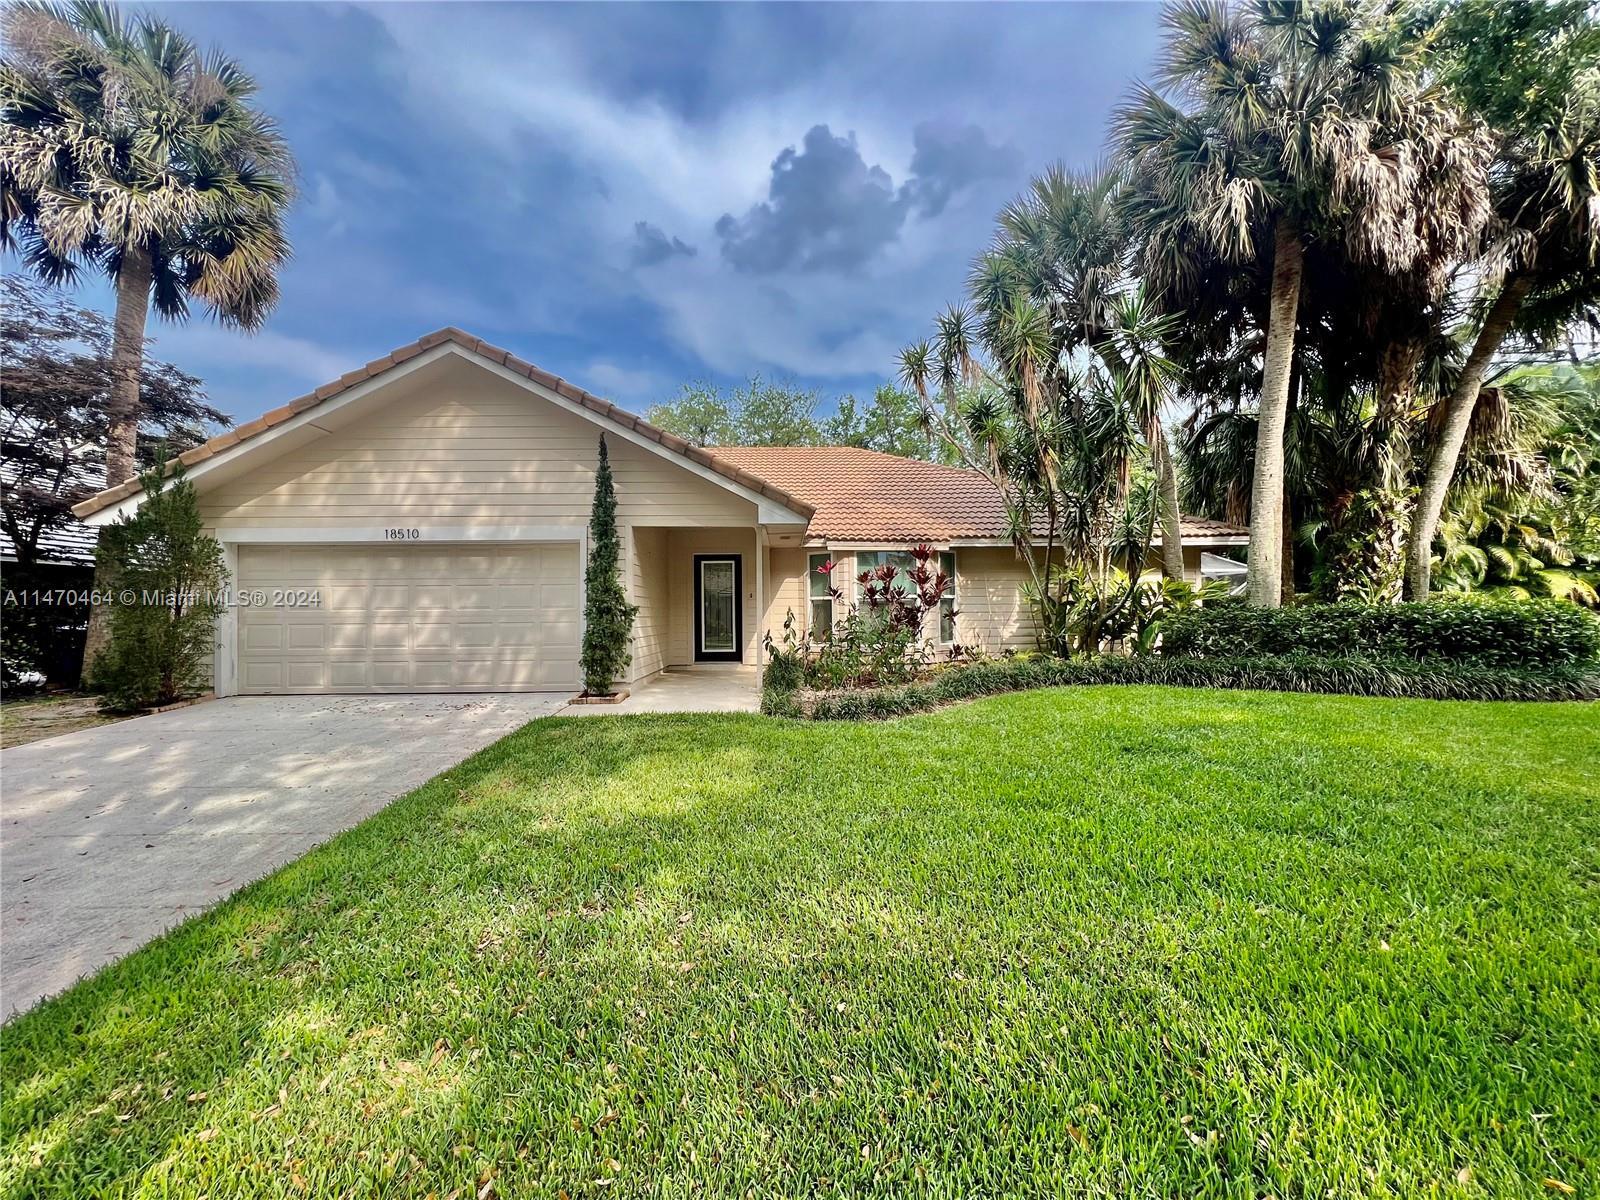 Welcome to this beautiful home in the highly desirable community of The Shores of Jupiter. This home